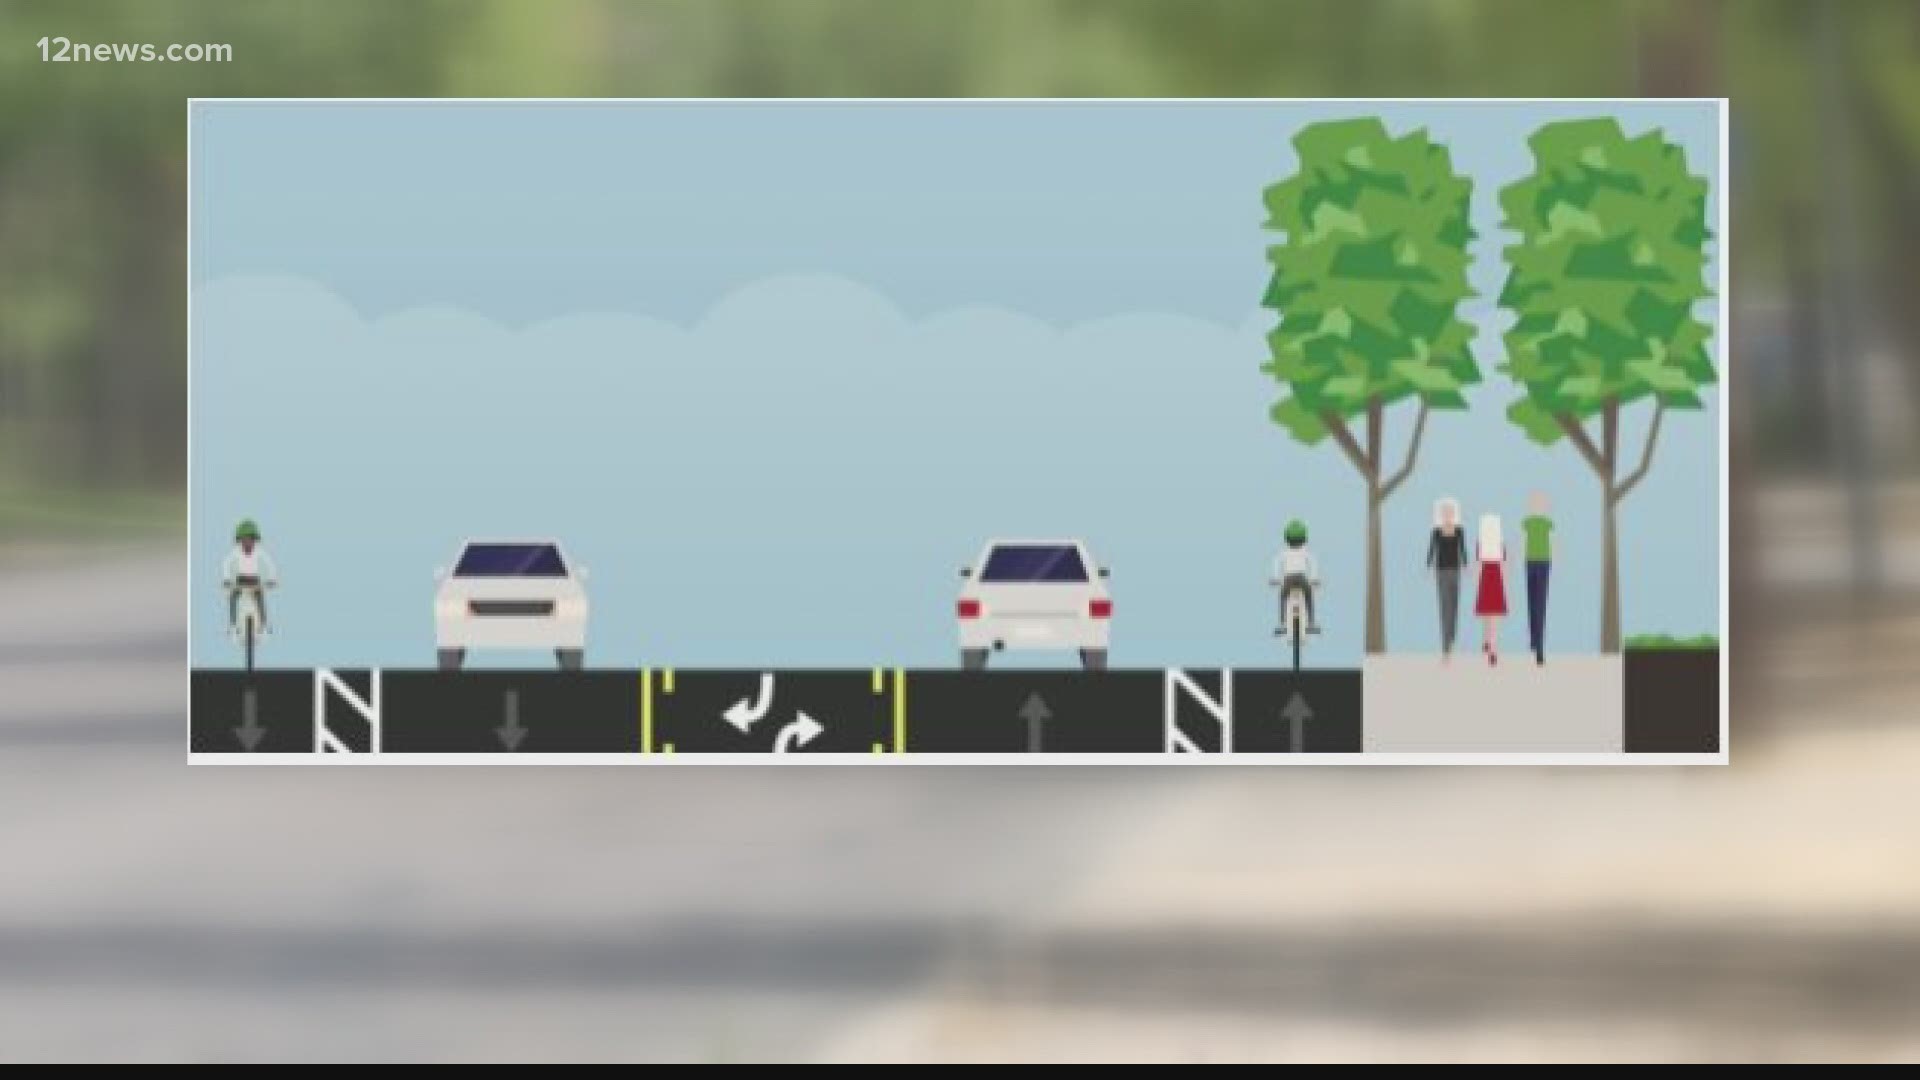 The proposal would take Central Ave. down to one northbound and one southbound lane, with a dedicated center left-turn lane and a buffered bike lane on either side.